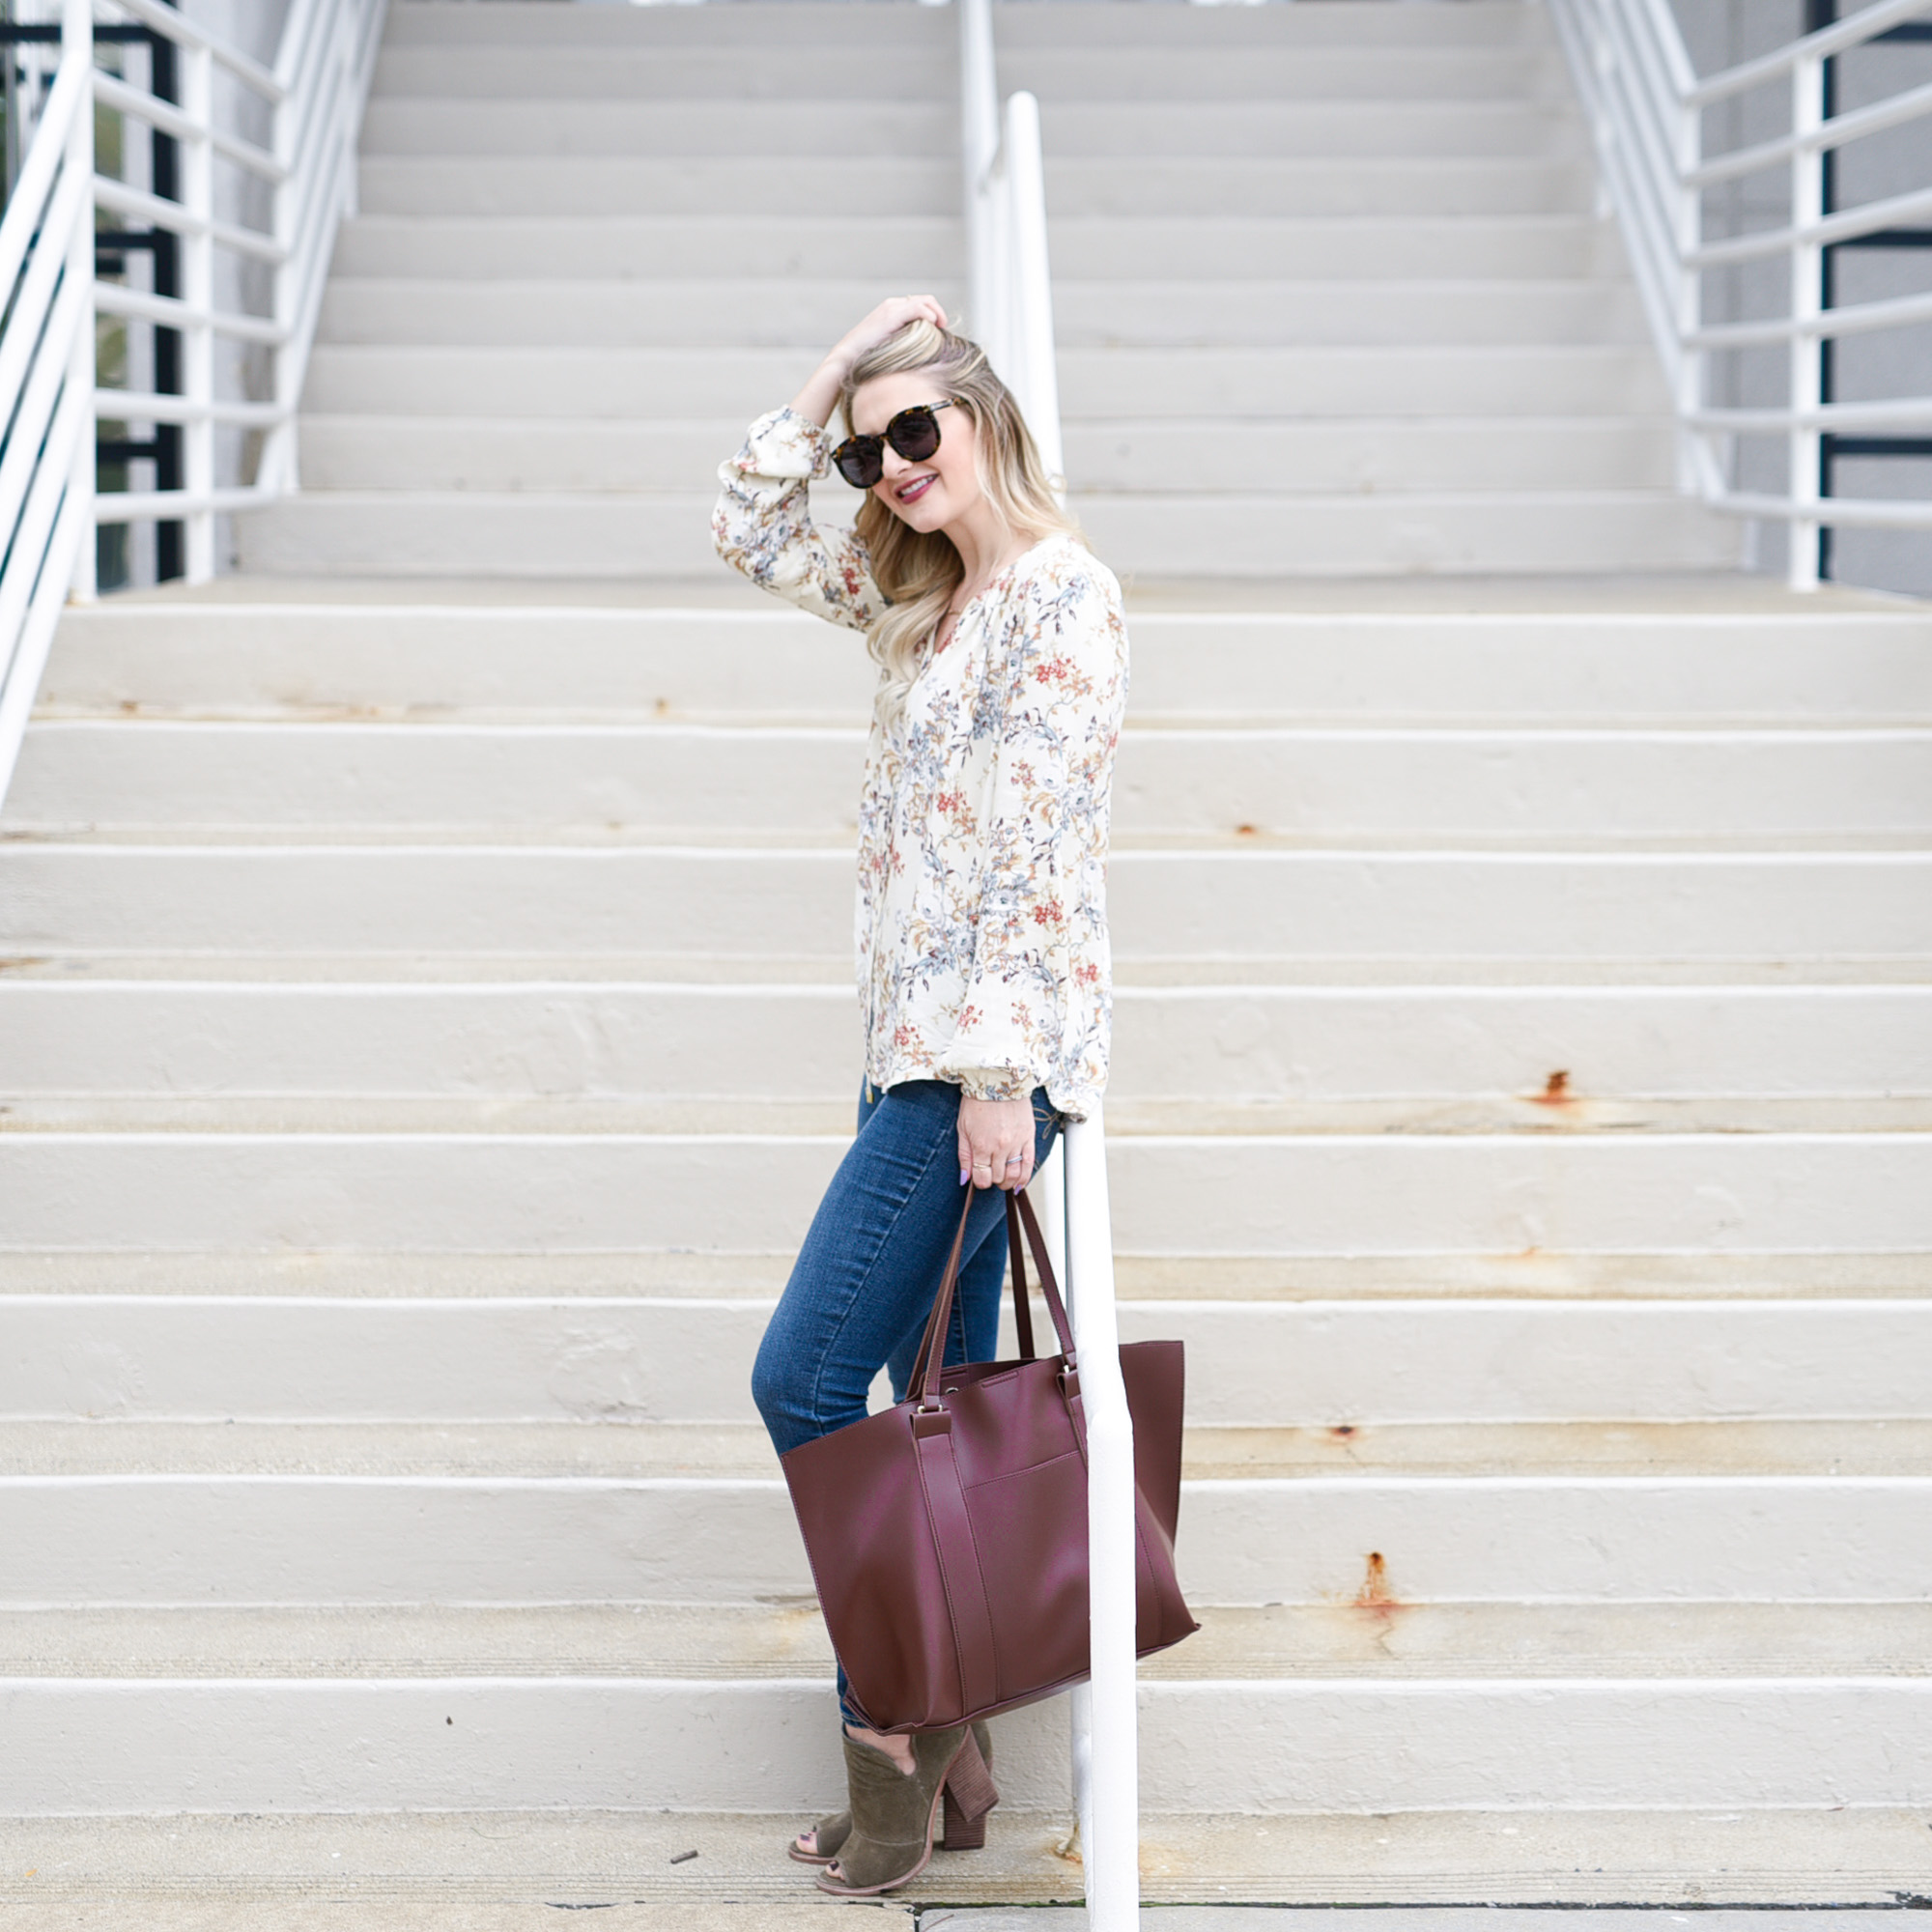 Jenna Colgrove wearing a pre-fall outfit: floral peasant top, skinny jeans, and suede booties with a carry all tote.